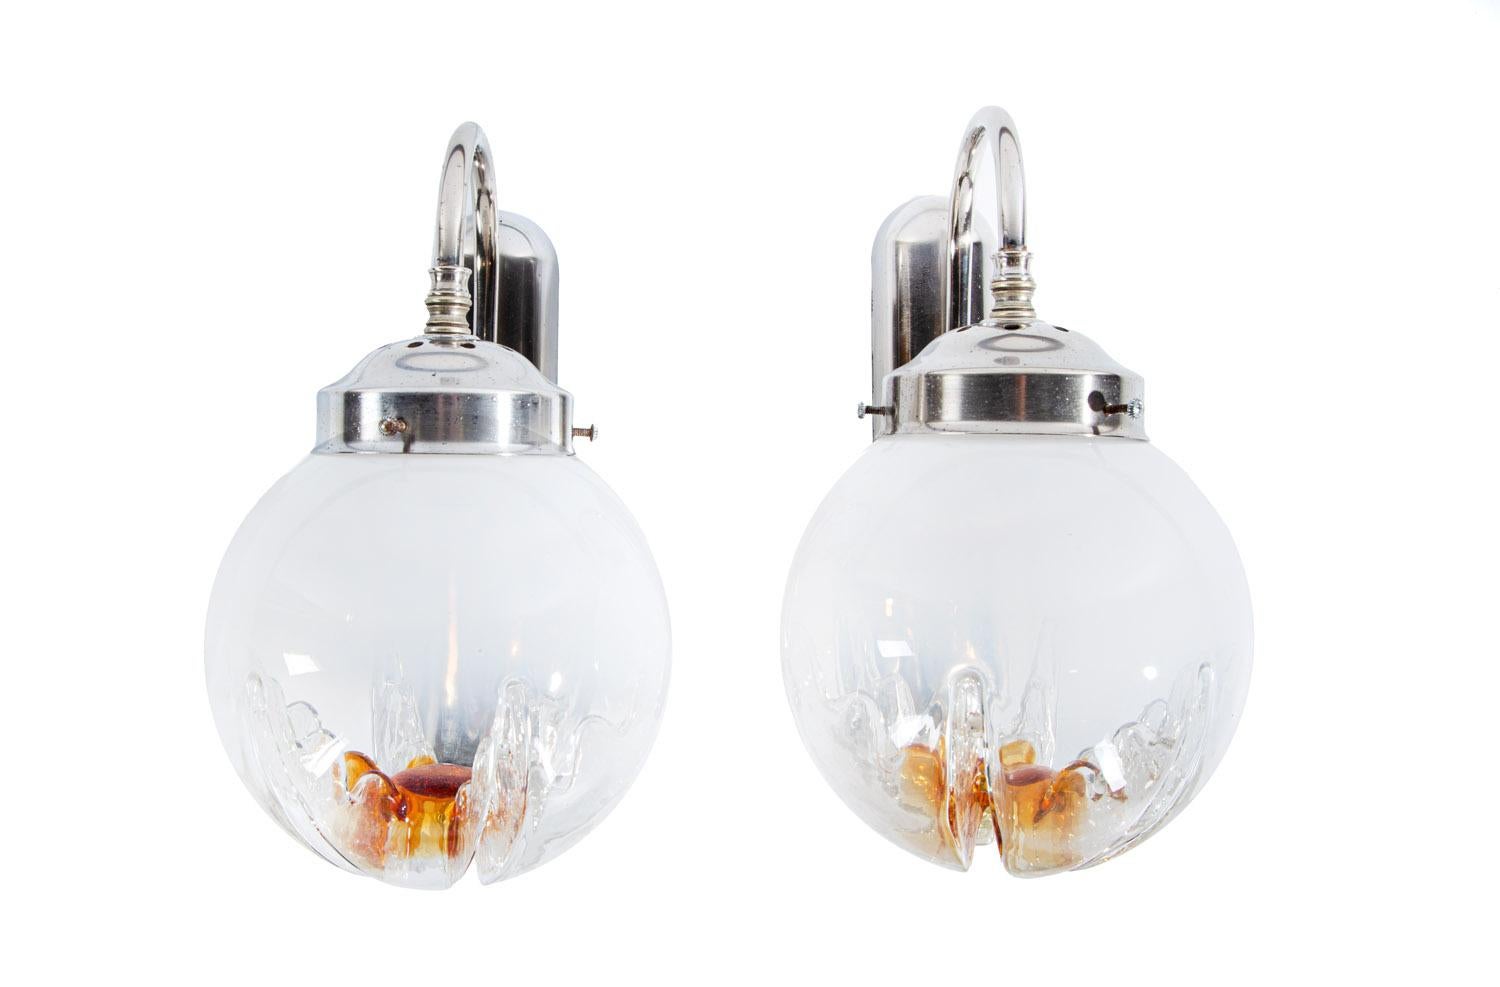 2 wall lamps produced in Italy by Mazzega, 70s